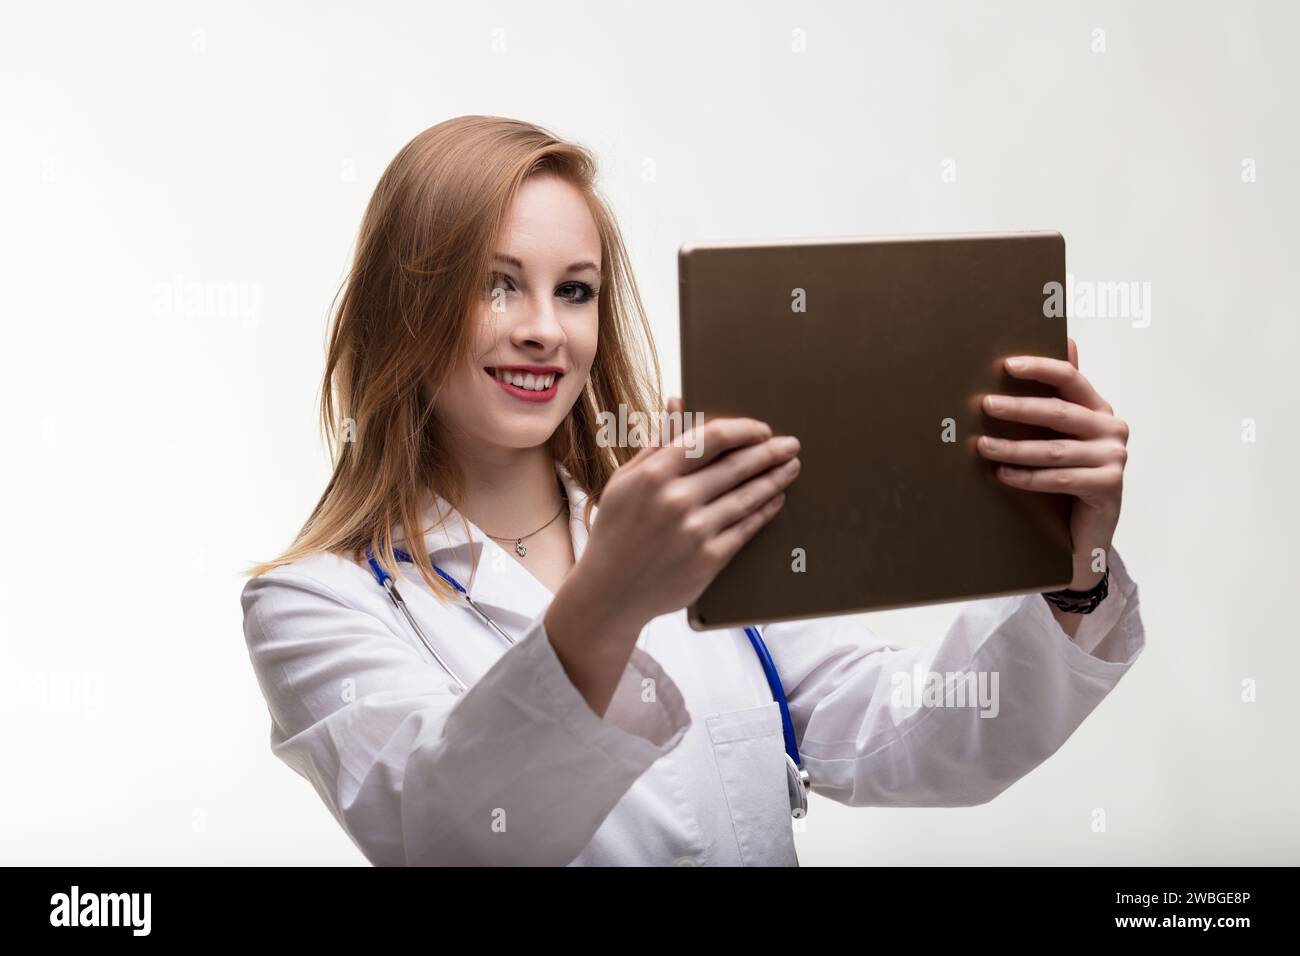 Engaged and tech-savvy doctor reviews patient information on a digital device, smiling Stock Photo